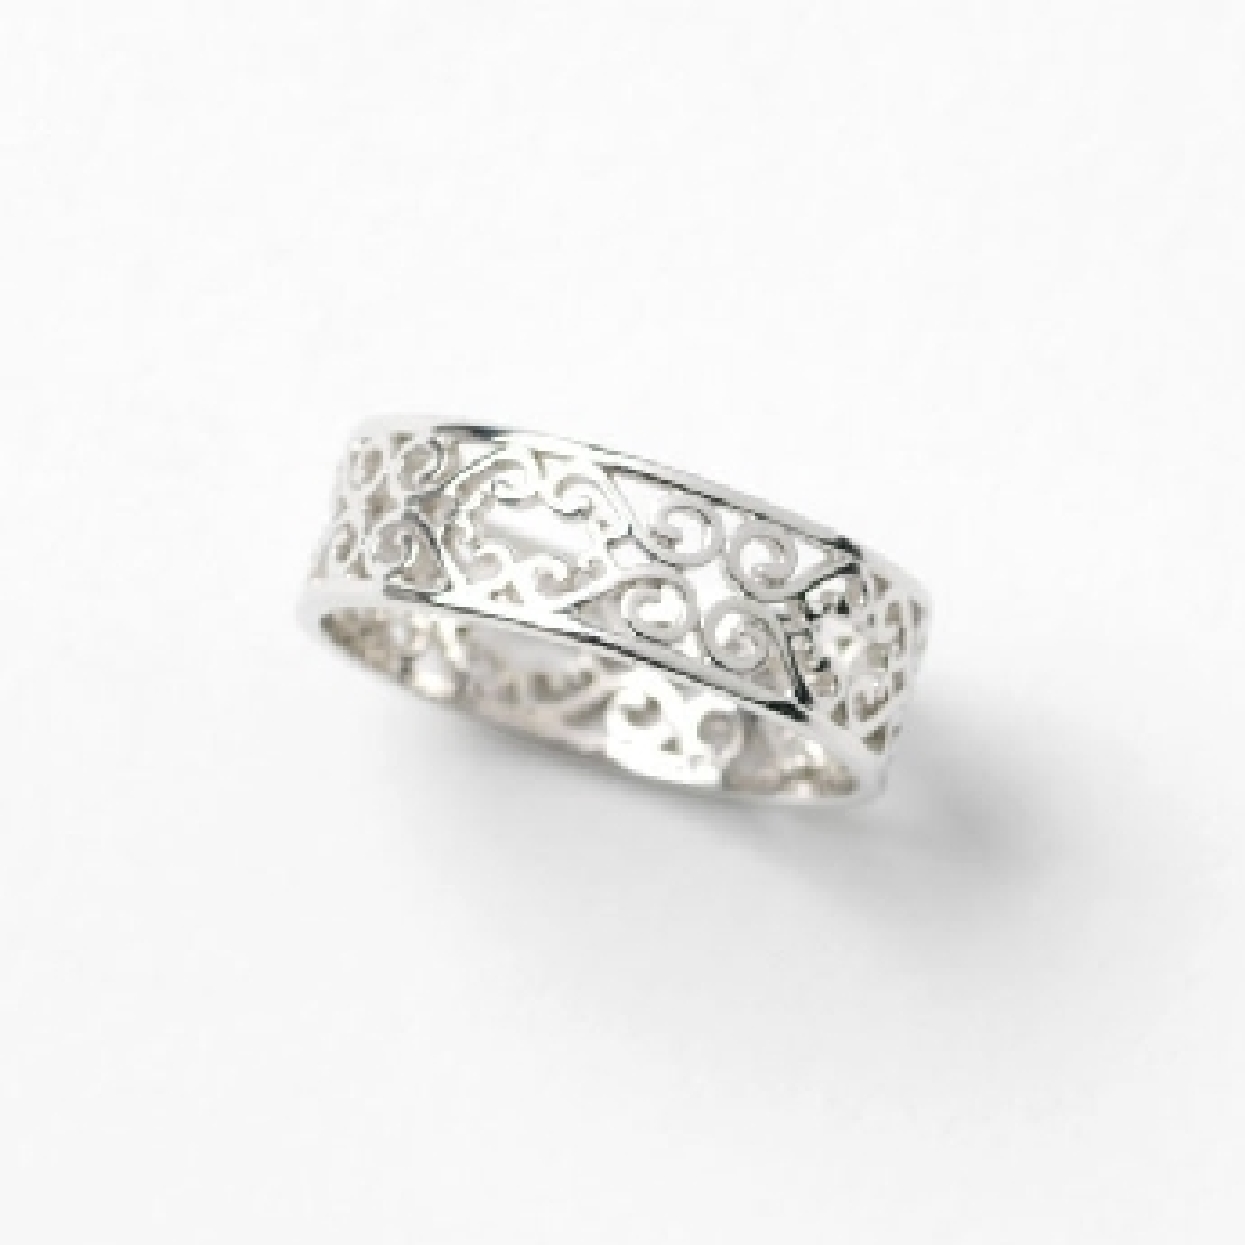 Southern Gates Balcony Series band. Size 7. rhodium plated. R159/7